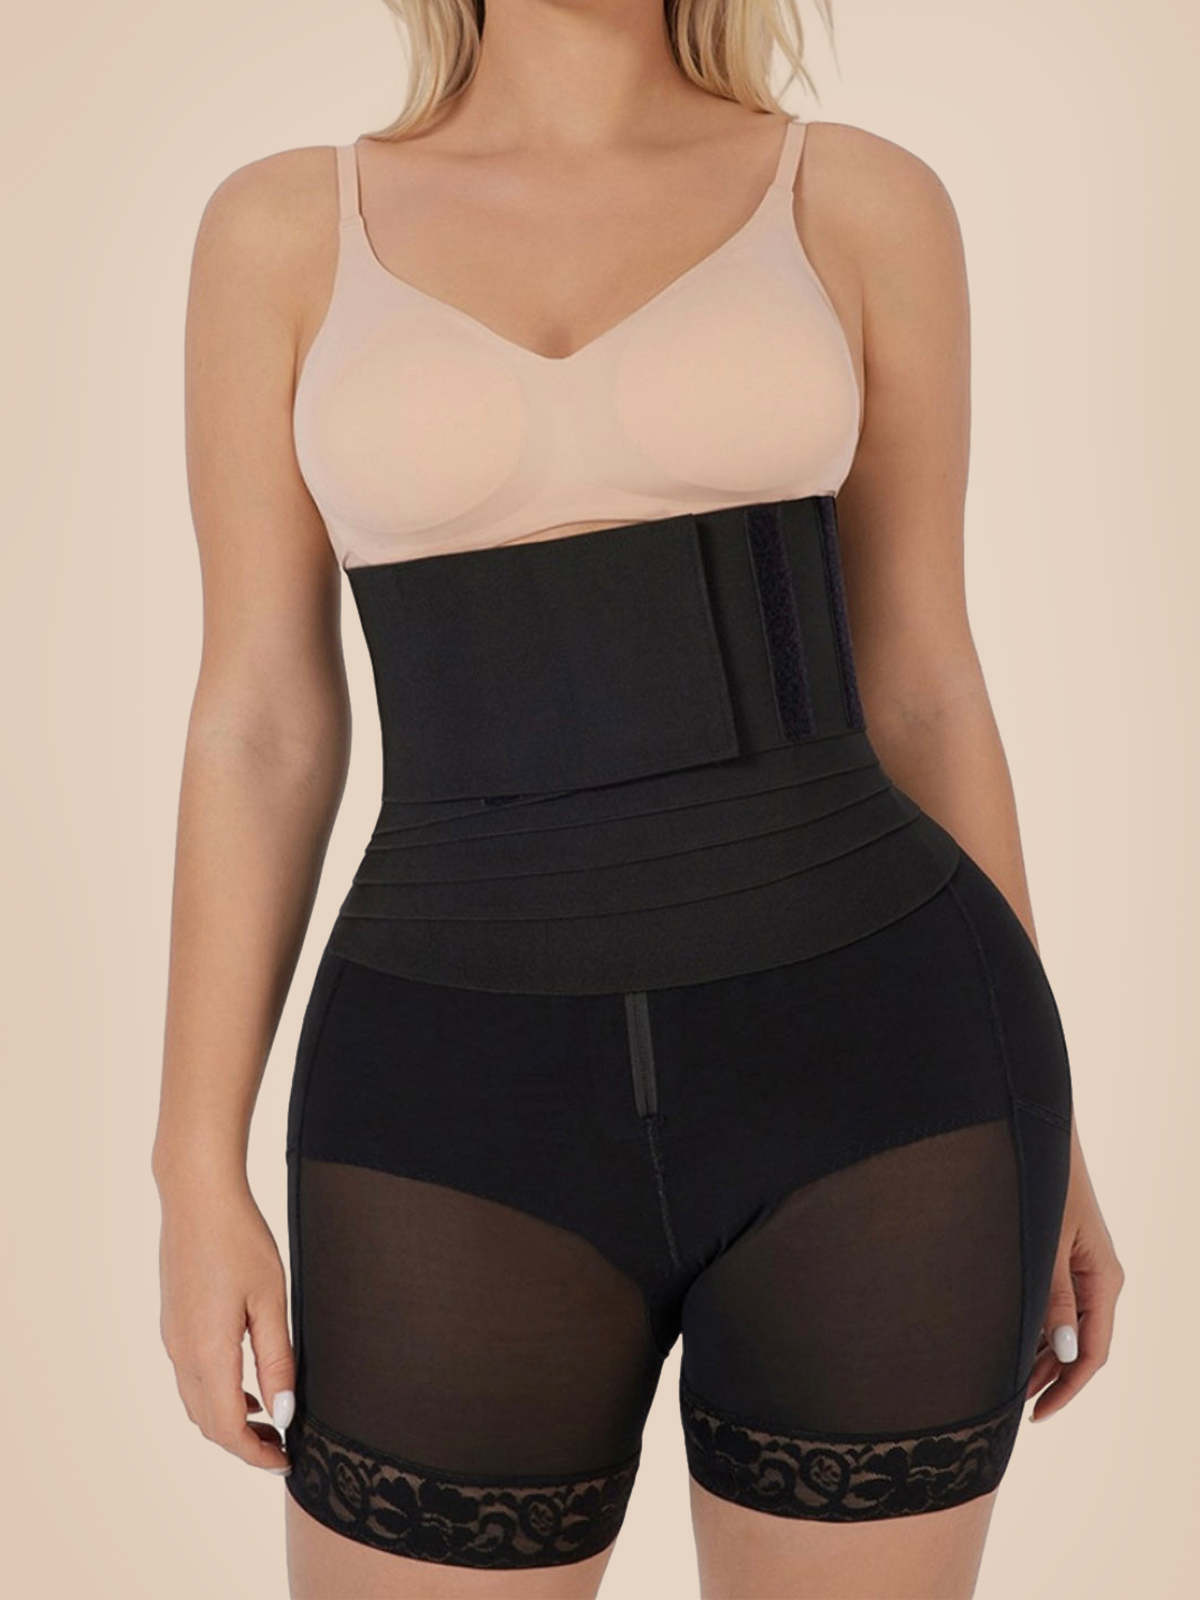 0227 NEW 2 IN 1 GIRDLE LIFT SHORTS AND ADJUSTABLE WAIST BAND.